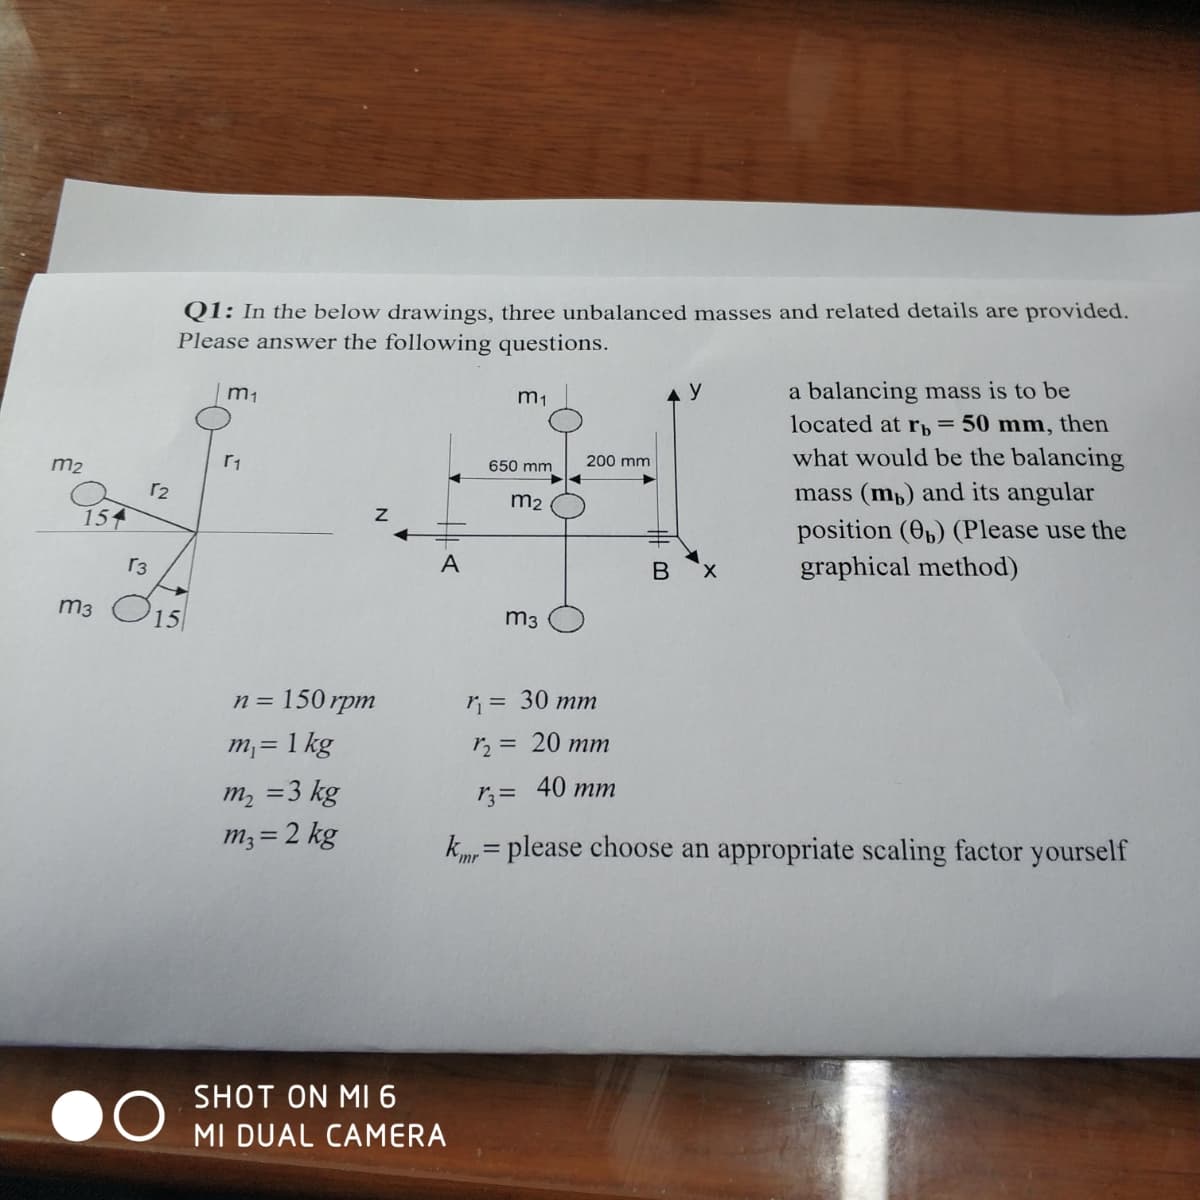 Q1: In the below drawings, three unbalanced masses and related details are provided.
Please answer the following questions.
a balancing mass is to be
located at rb= 50 mm, then
what would be the balancing
m1
m1
m2
650 mm
200 mm
r2
mass (mp) and its angular
m2
154
position (O,) (Please use the
graphical method)
r3
A
m3 O15
m3
n%3D 150 грт
r = 30 mm
m,= 1 kg
r2 = 20 mm
40 тm
m, =3 kg
m3 = 2 kg
%3D
km, = please choose an appropriate scaling factor yourself
SHOT ON MI 6
MI DUAL CAMERA
